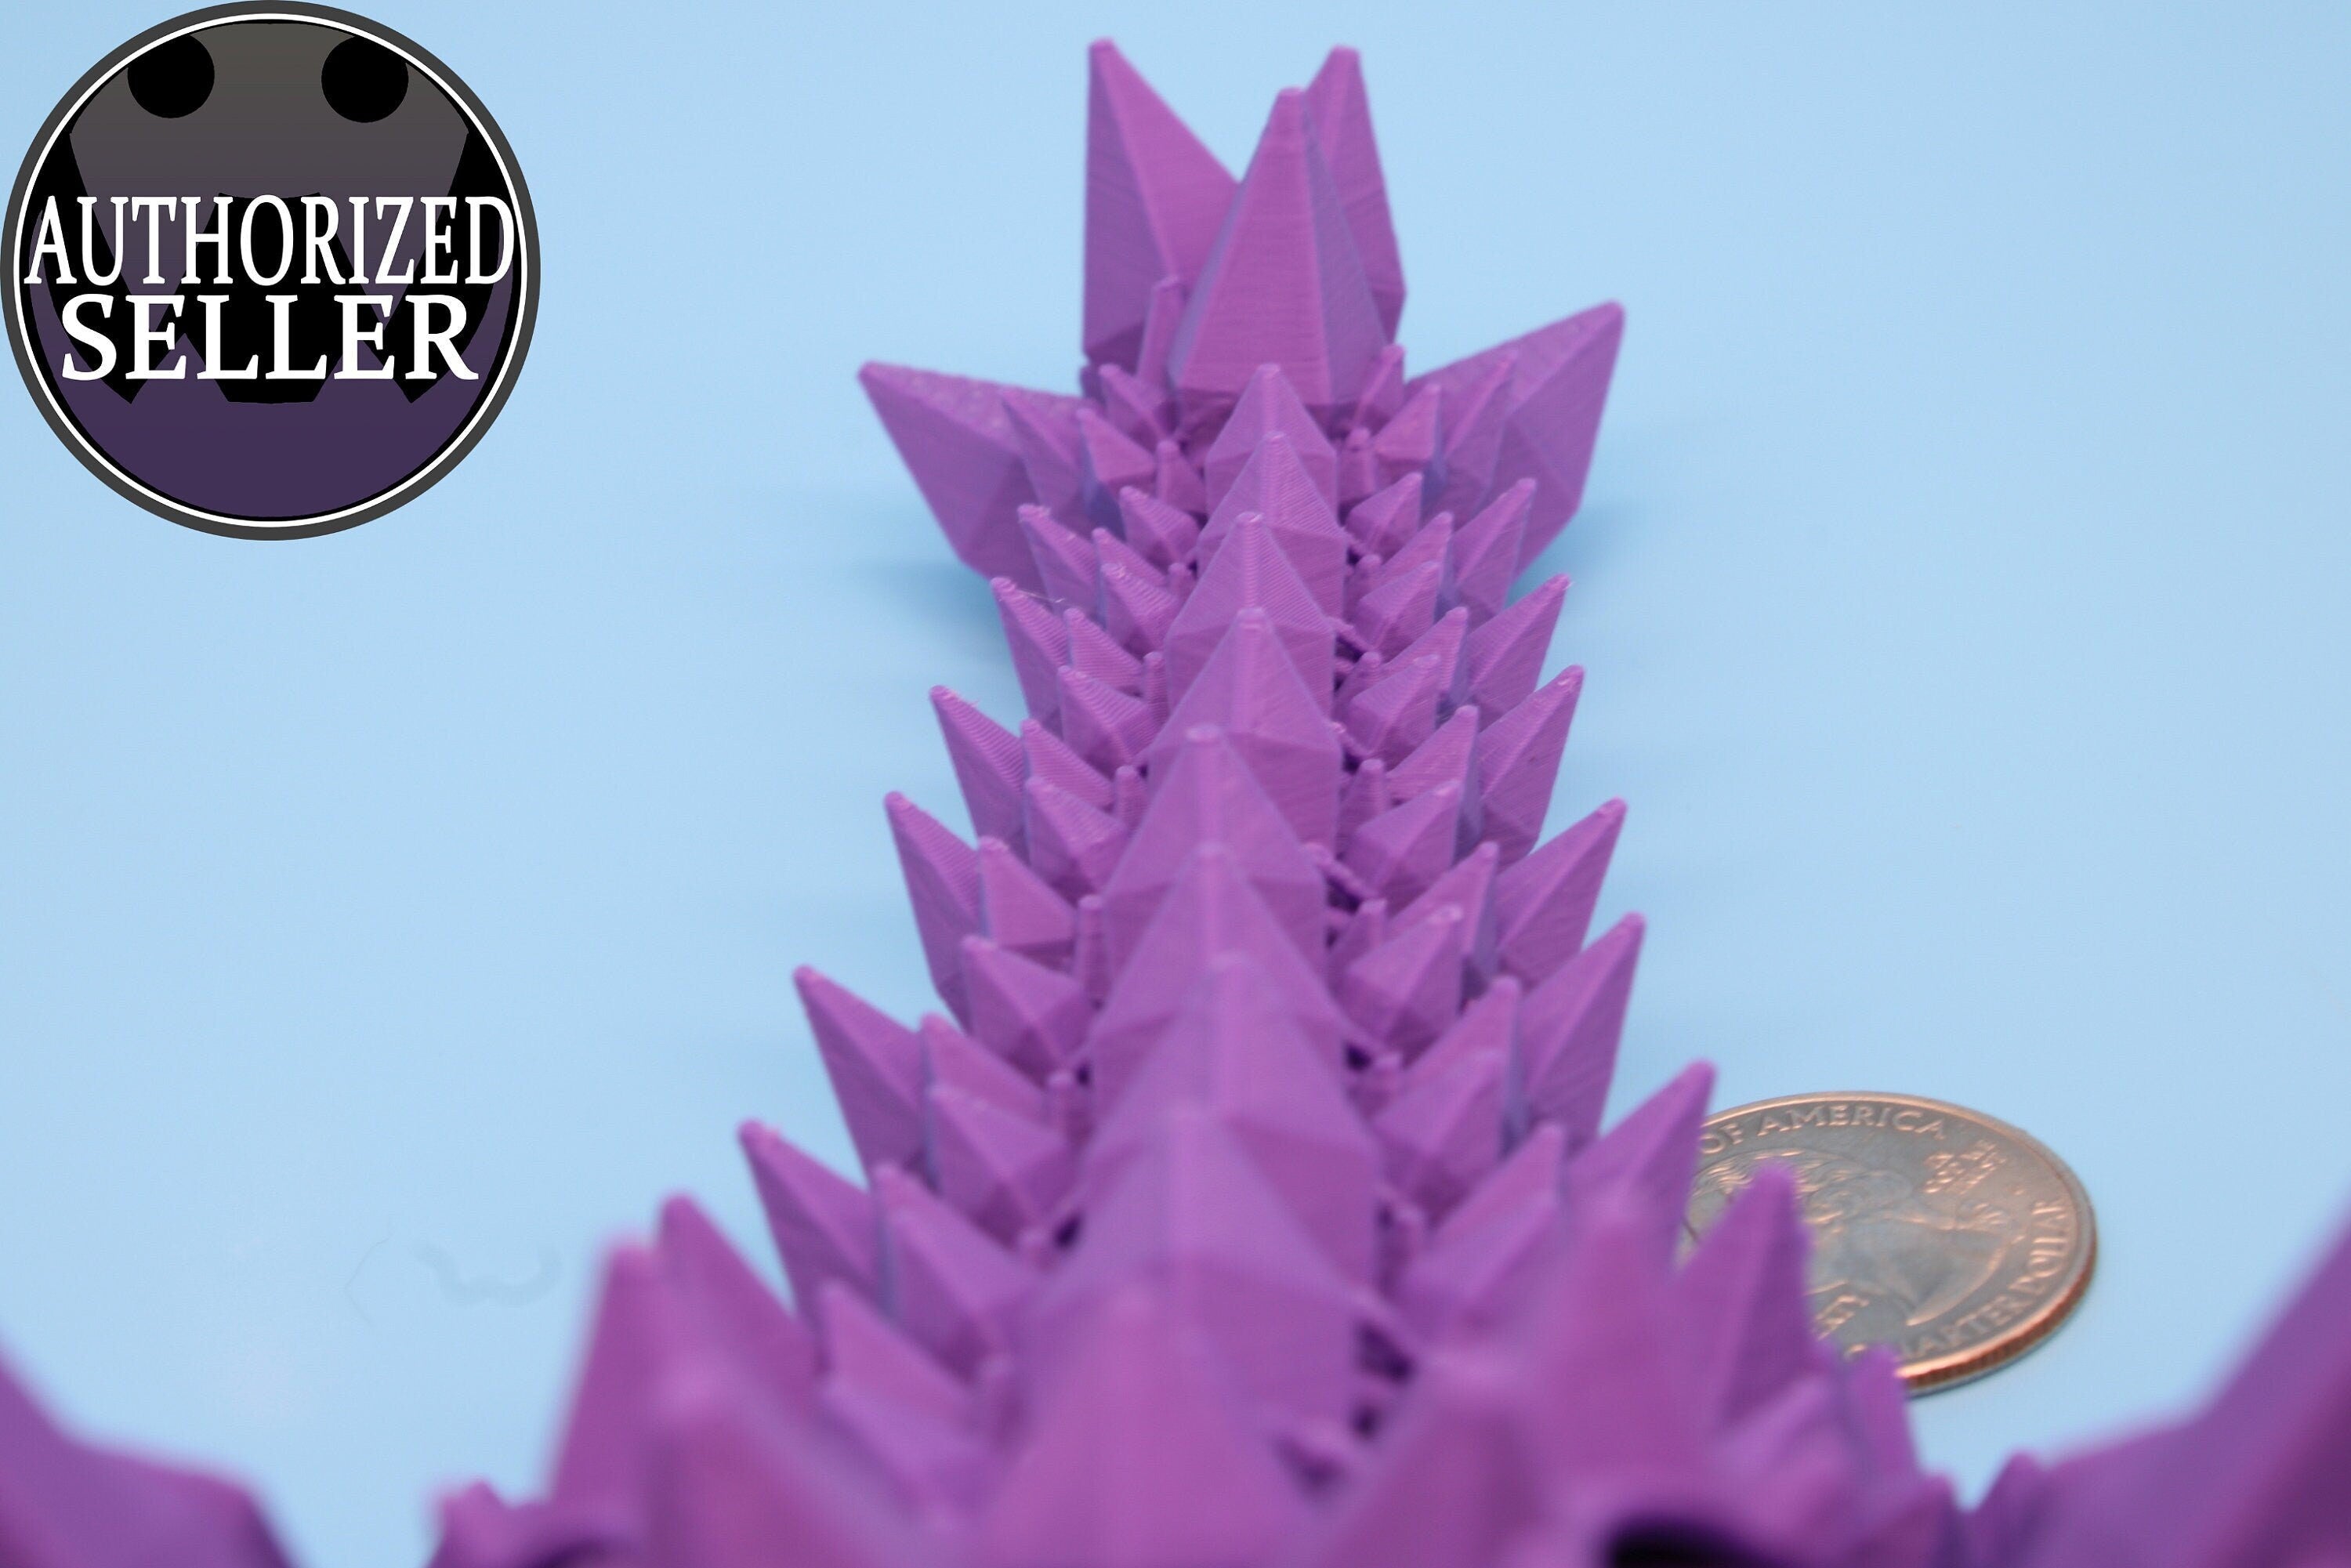 Purple Baby Crystal Winged Dragon. 3D printed articulating dragon Fidget, Flexi, Toy 11.5 in. Stress Relief, Gift.